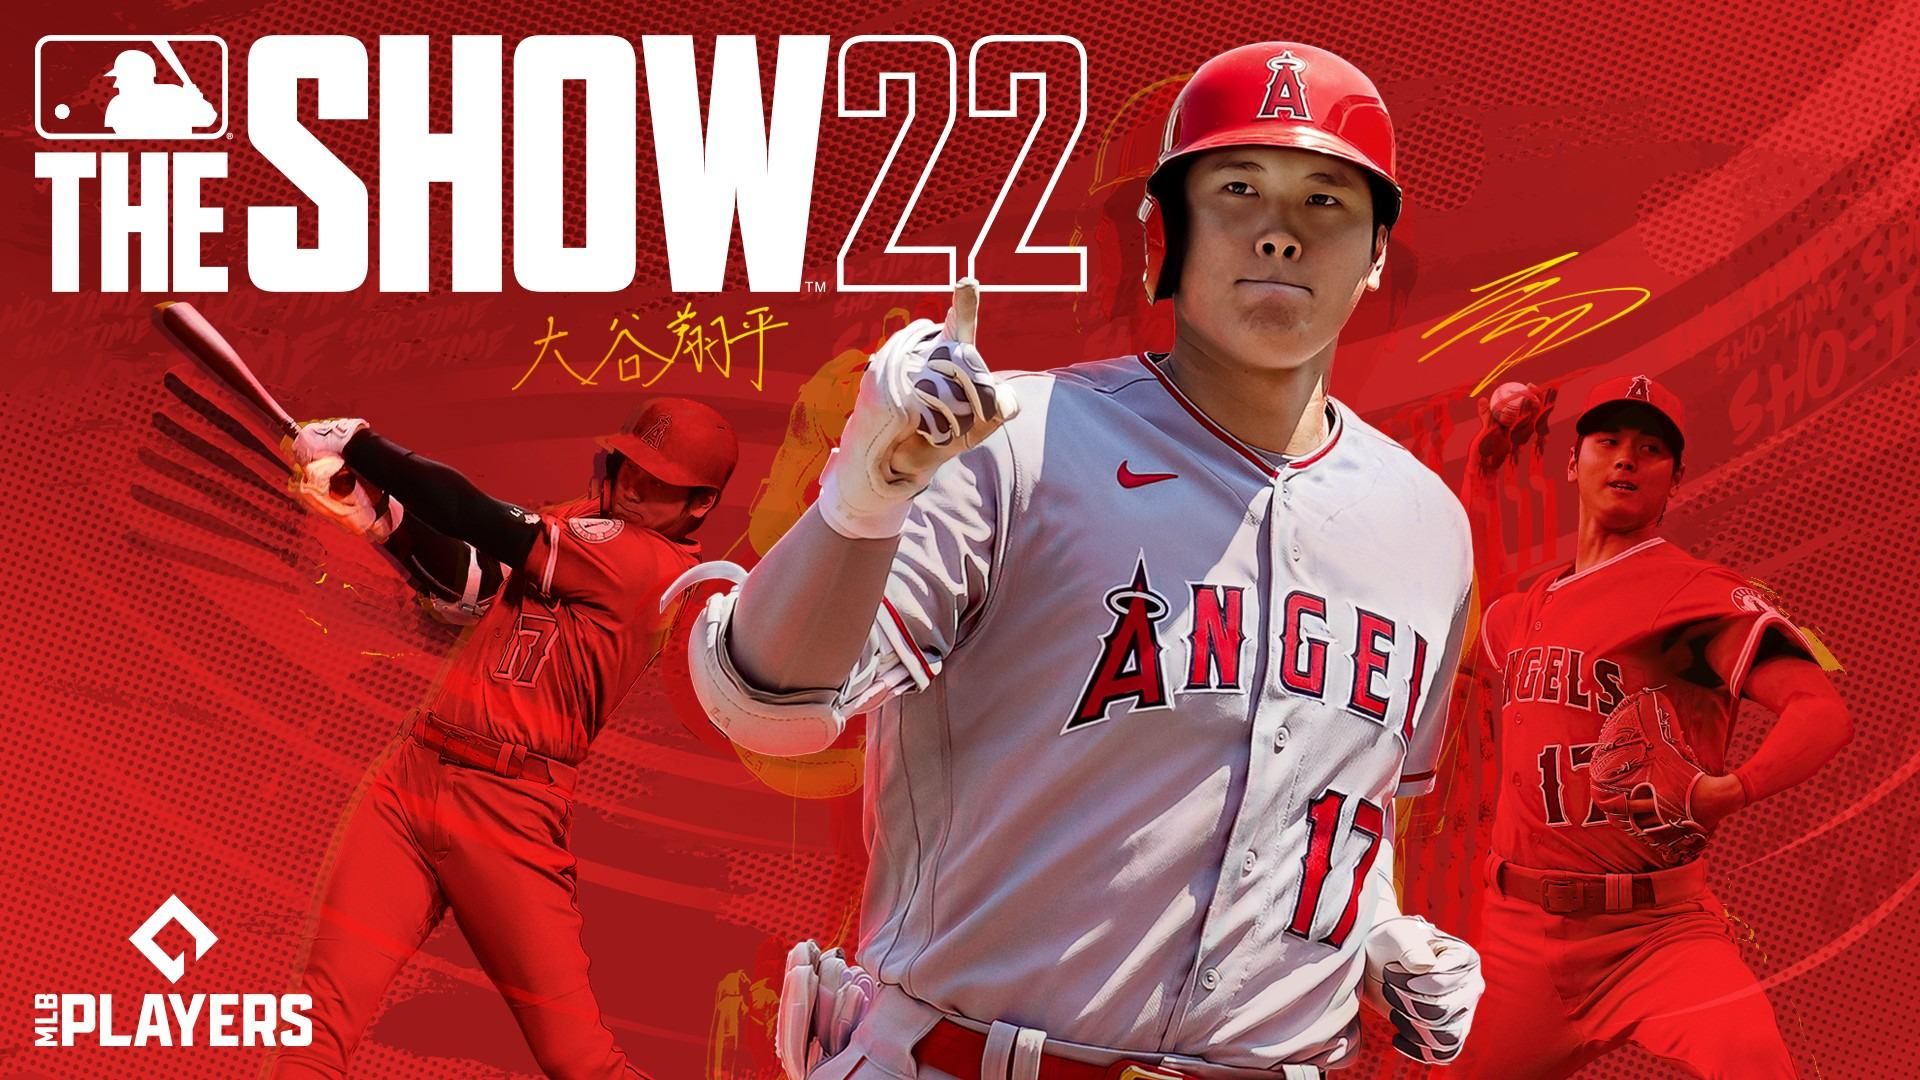 Coming Soon to Xbox Game Pass: MLB The Show 22, Life Is Strange: True Colors, Chinatown Detective Agency, and More